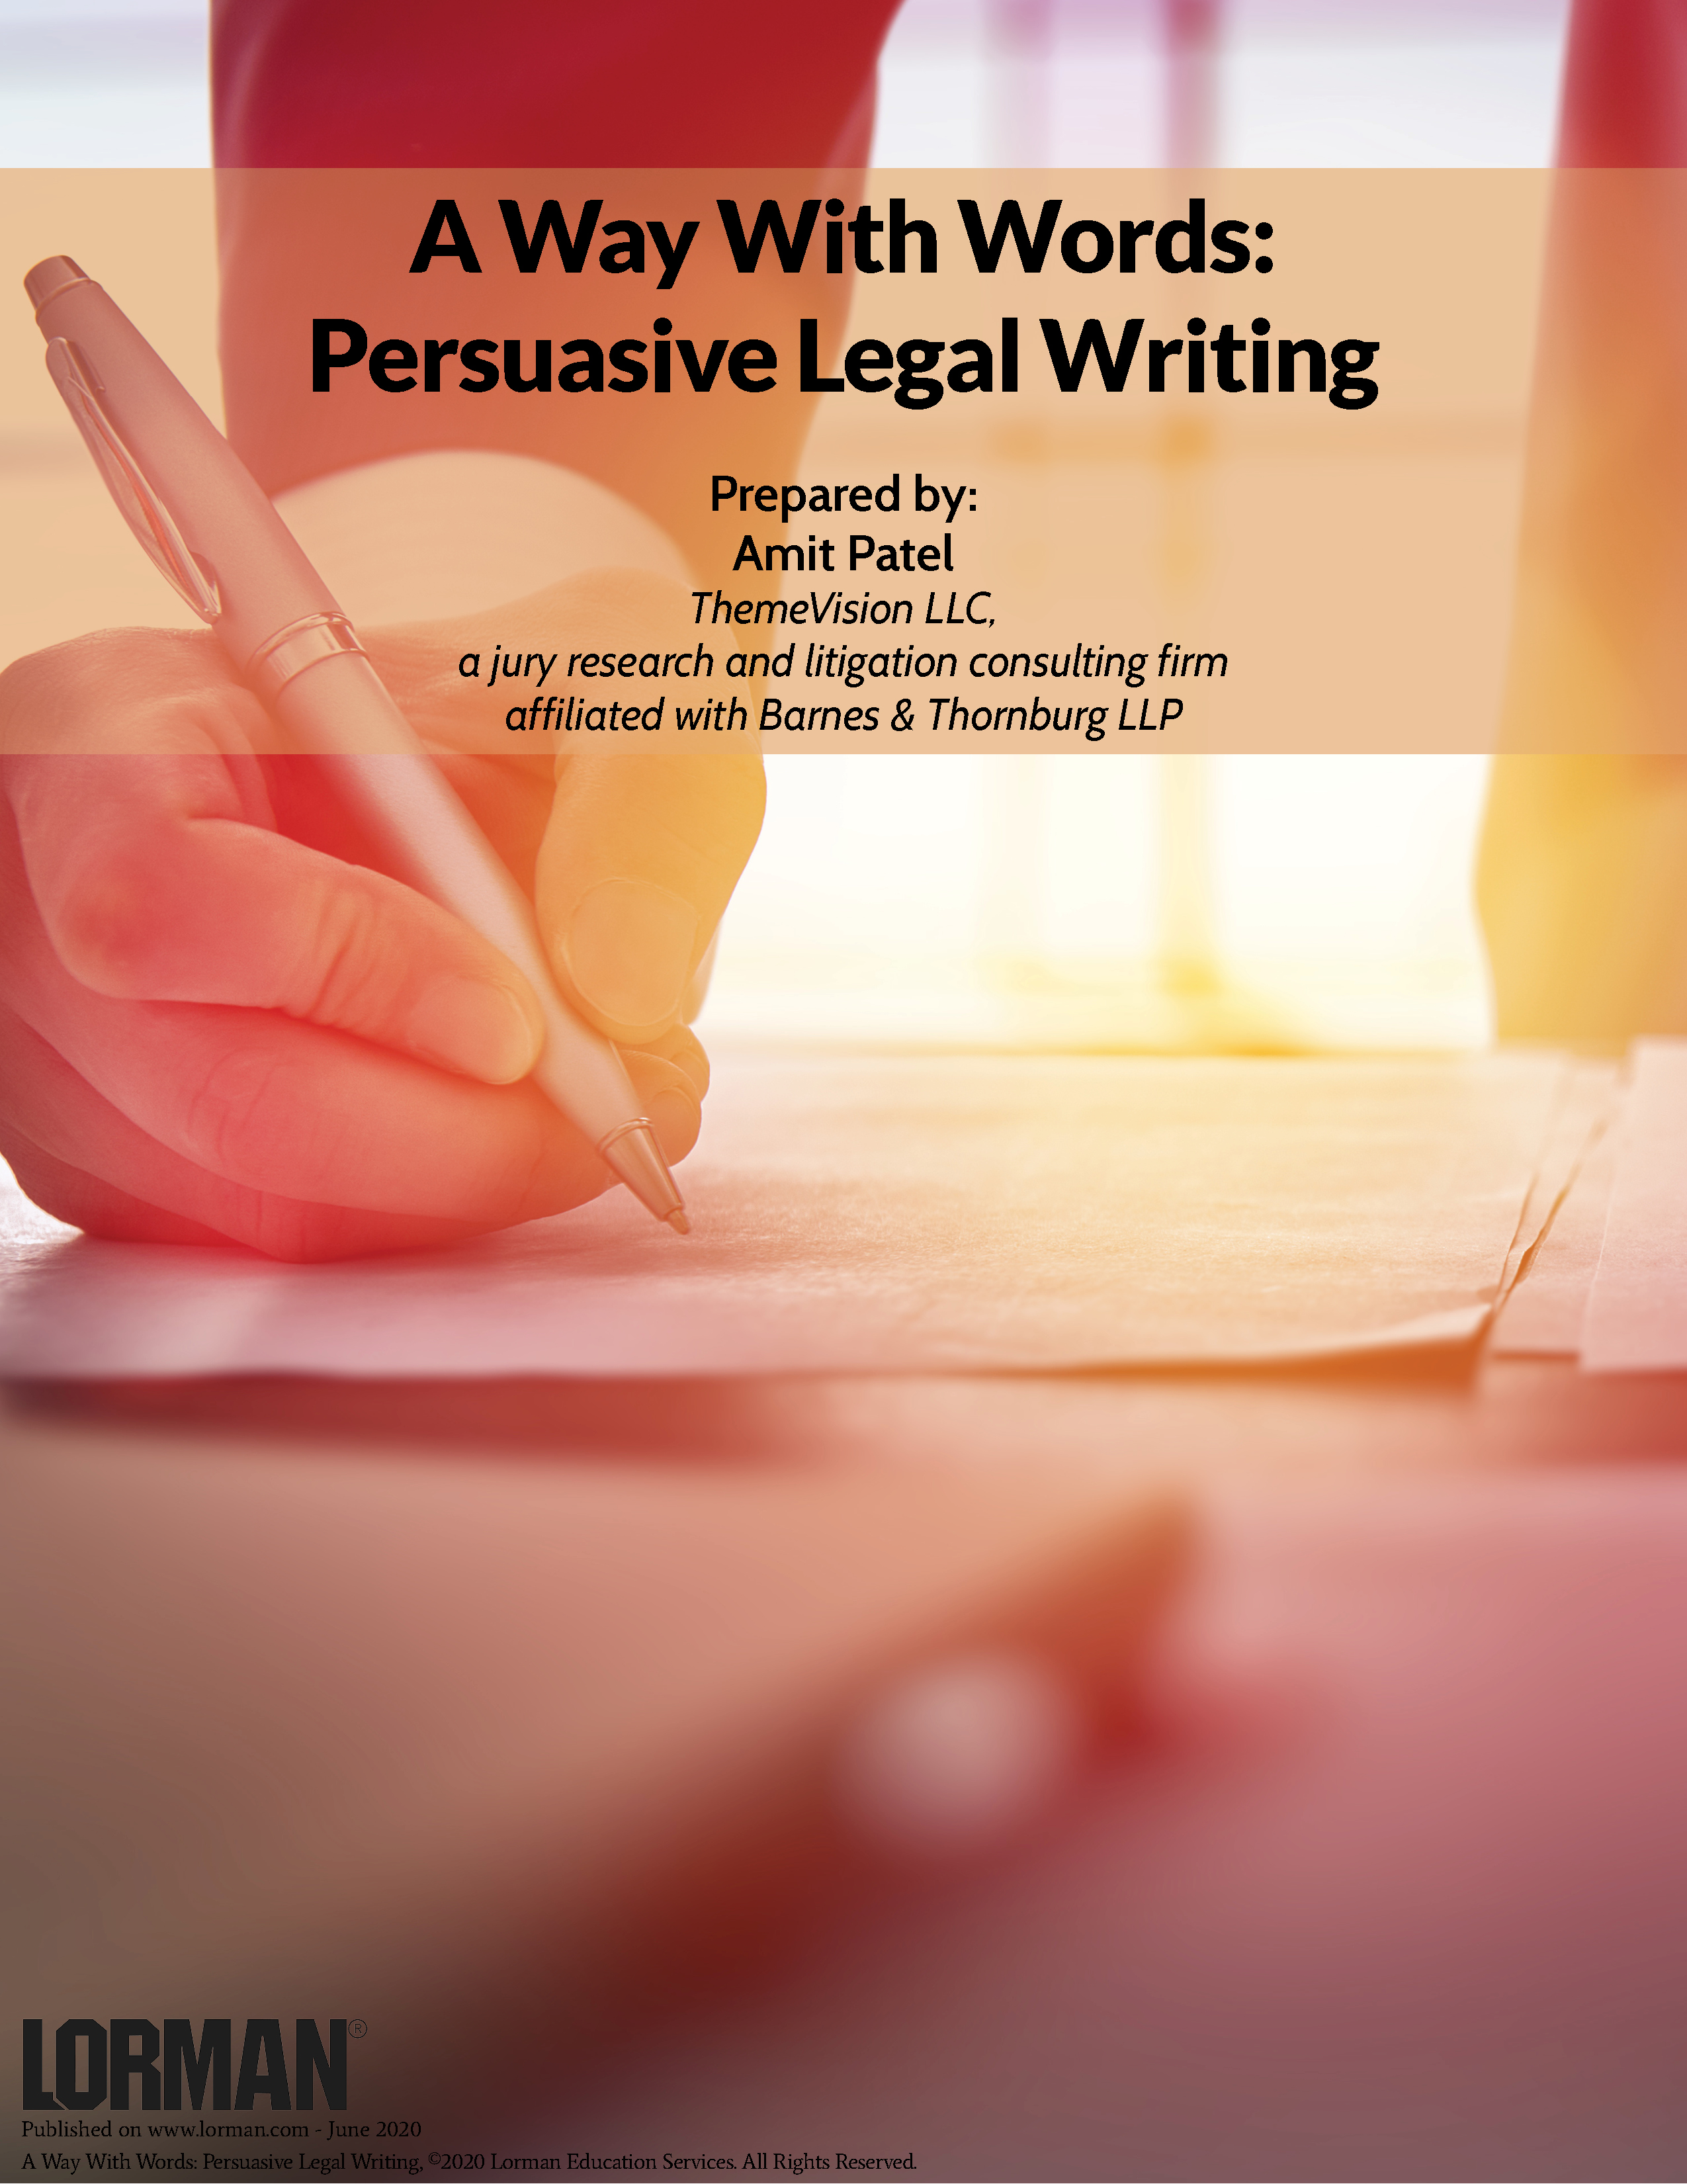 A Way With Words: Persuasive Legal Writing